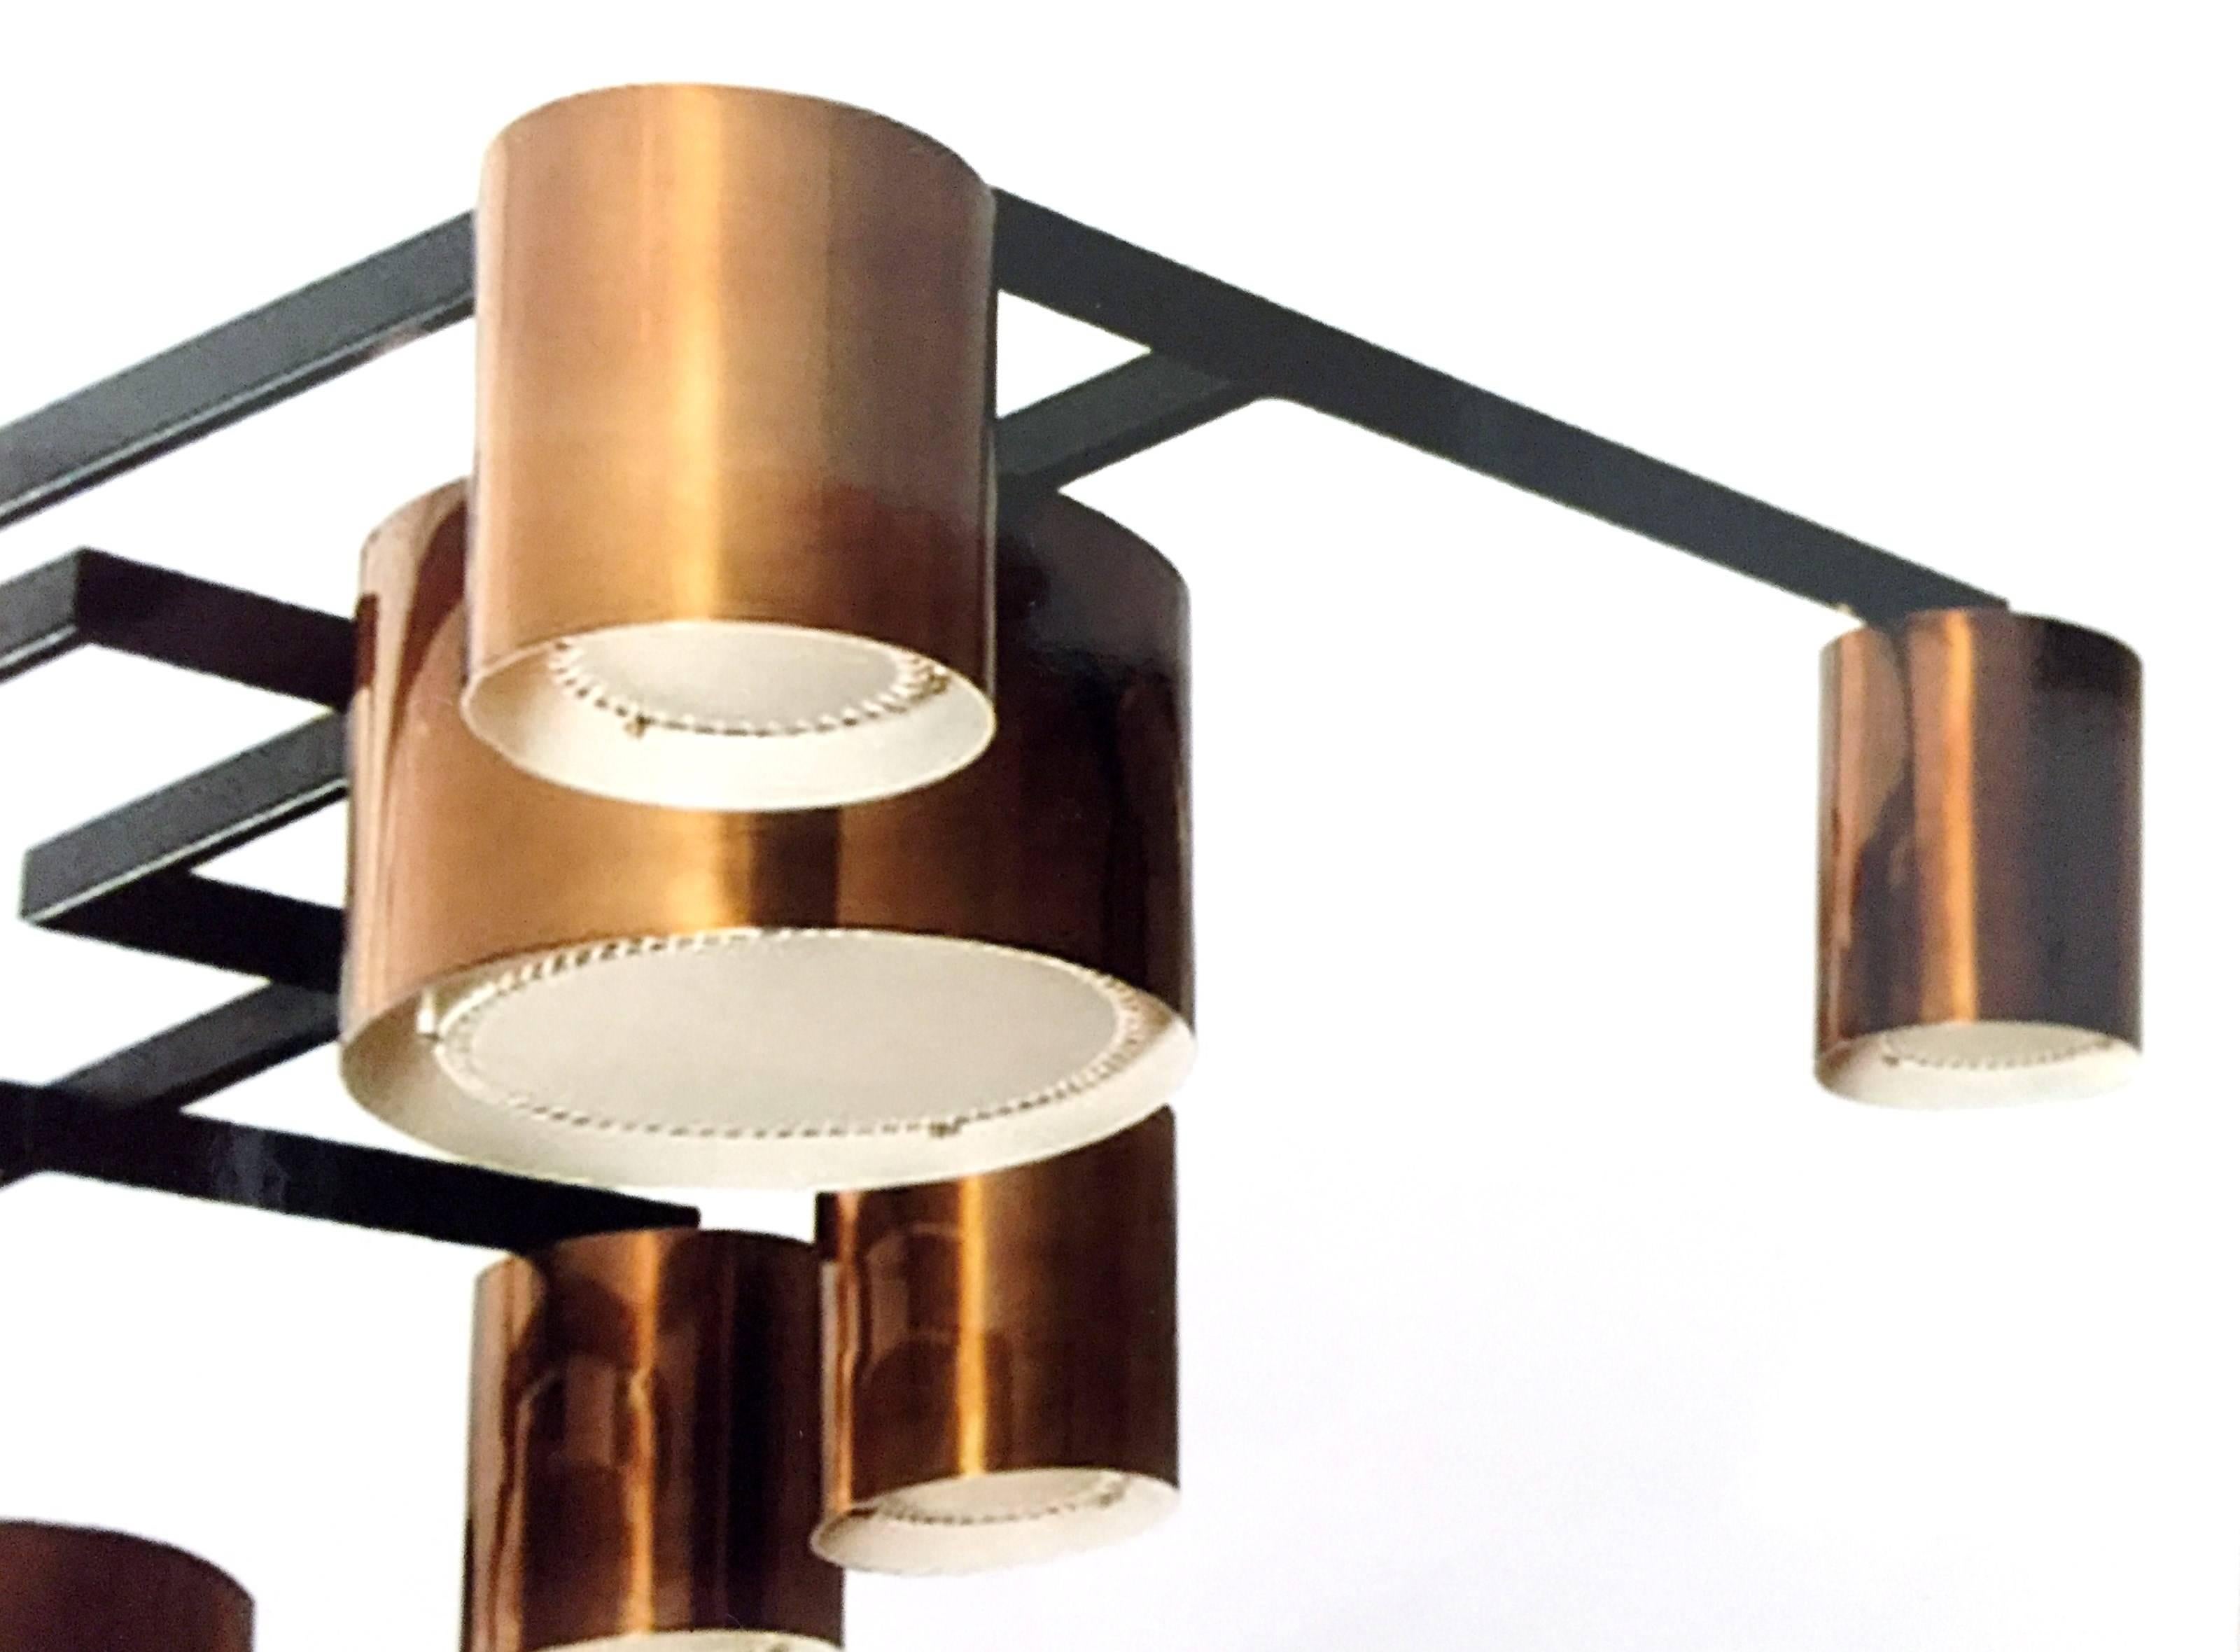 Impressive asymmetrical rectangular ceiling fixture by Diego Mardegan; the angular framework in black-painted steel with cylindrical lamp holders of two sizes (7" diameter and 10" diameter) in spun brass with laced parchment diffusers.